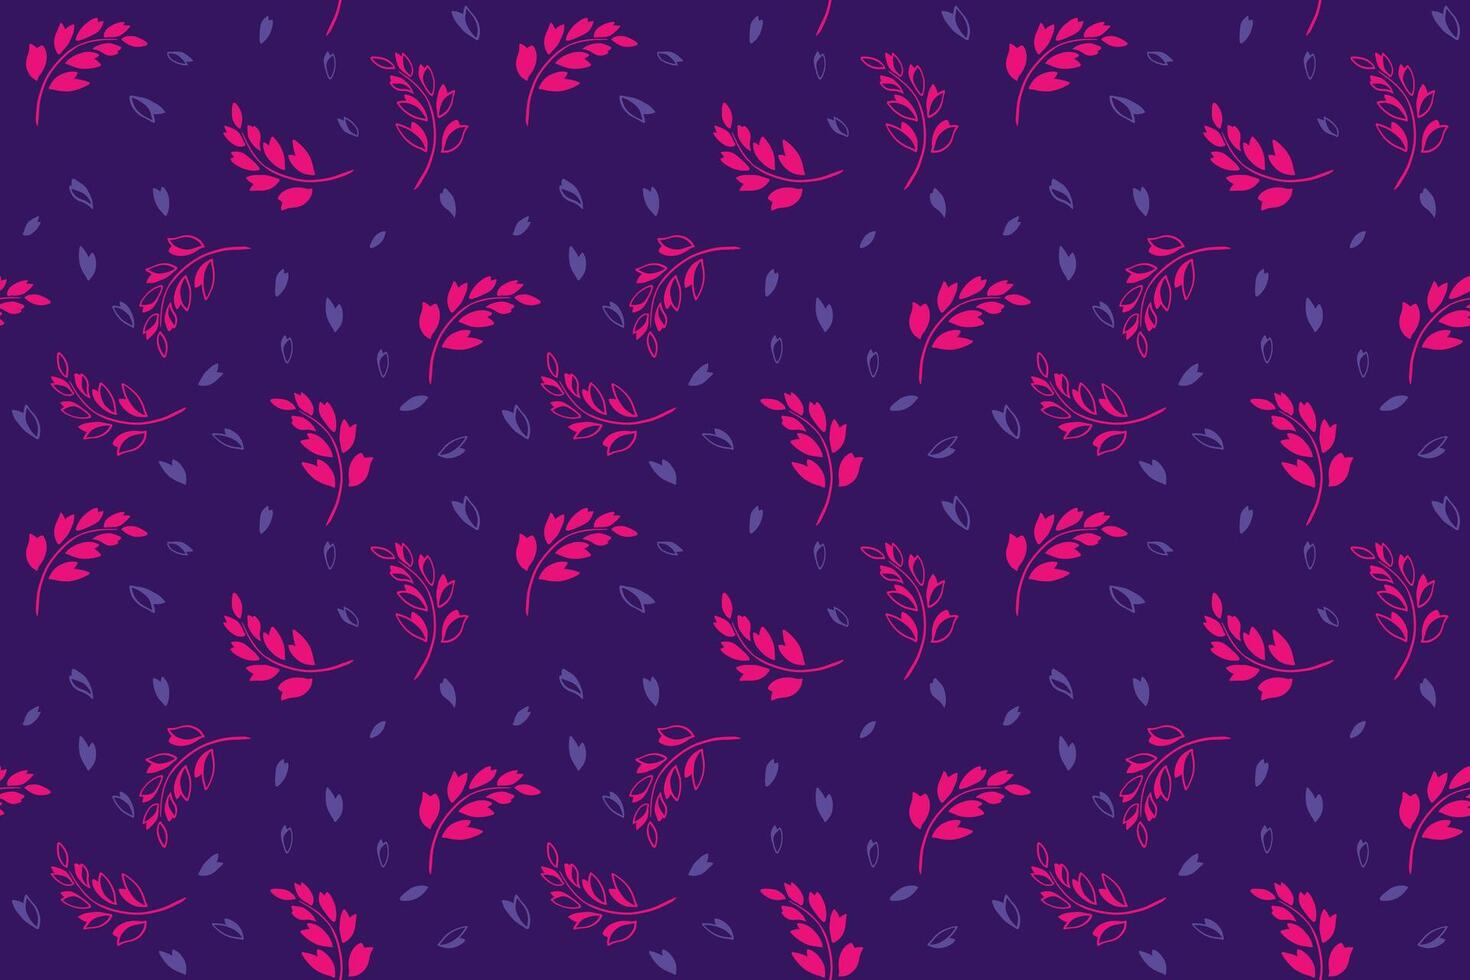 Bright purple simple seamless pattern with abstract creative tiny branches leaves, shapes, drops. Cute, minimalistic vector hand drawn print. Template for design, textile, printing, fashion, fabric